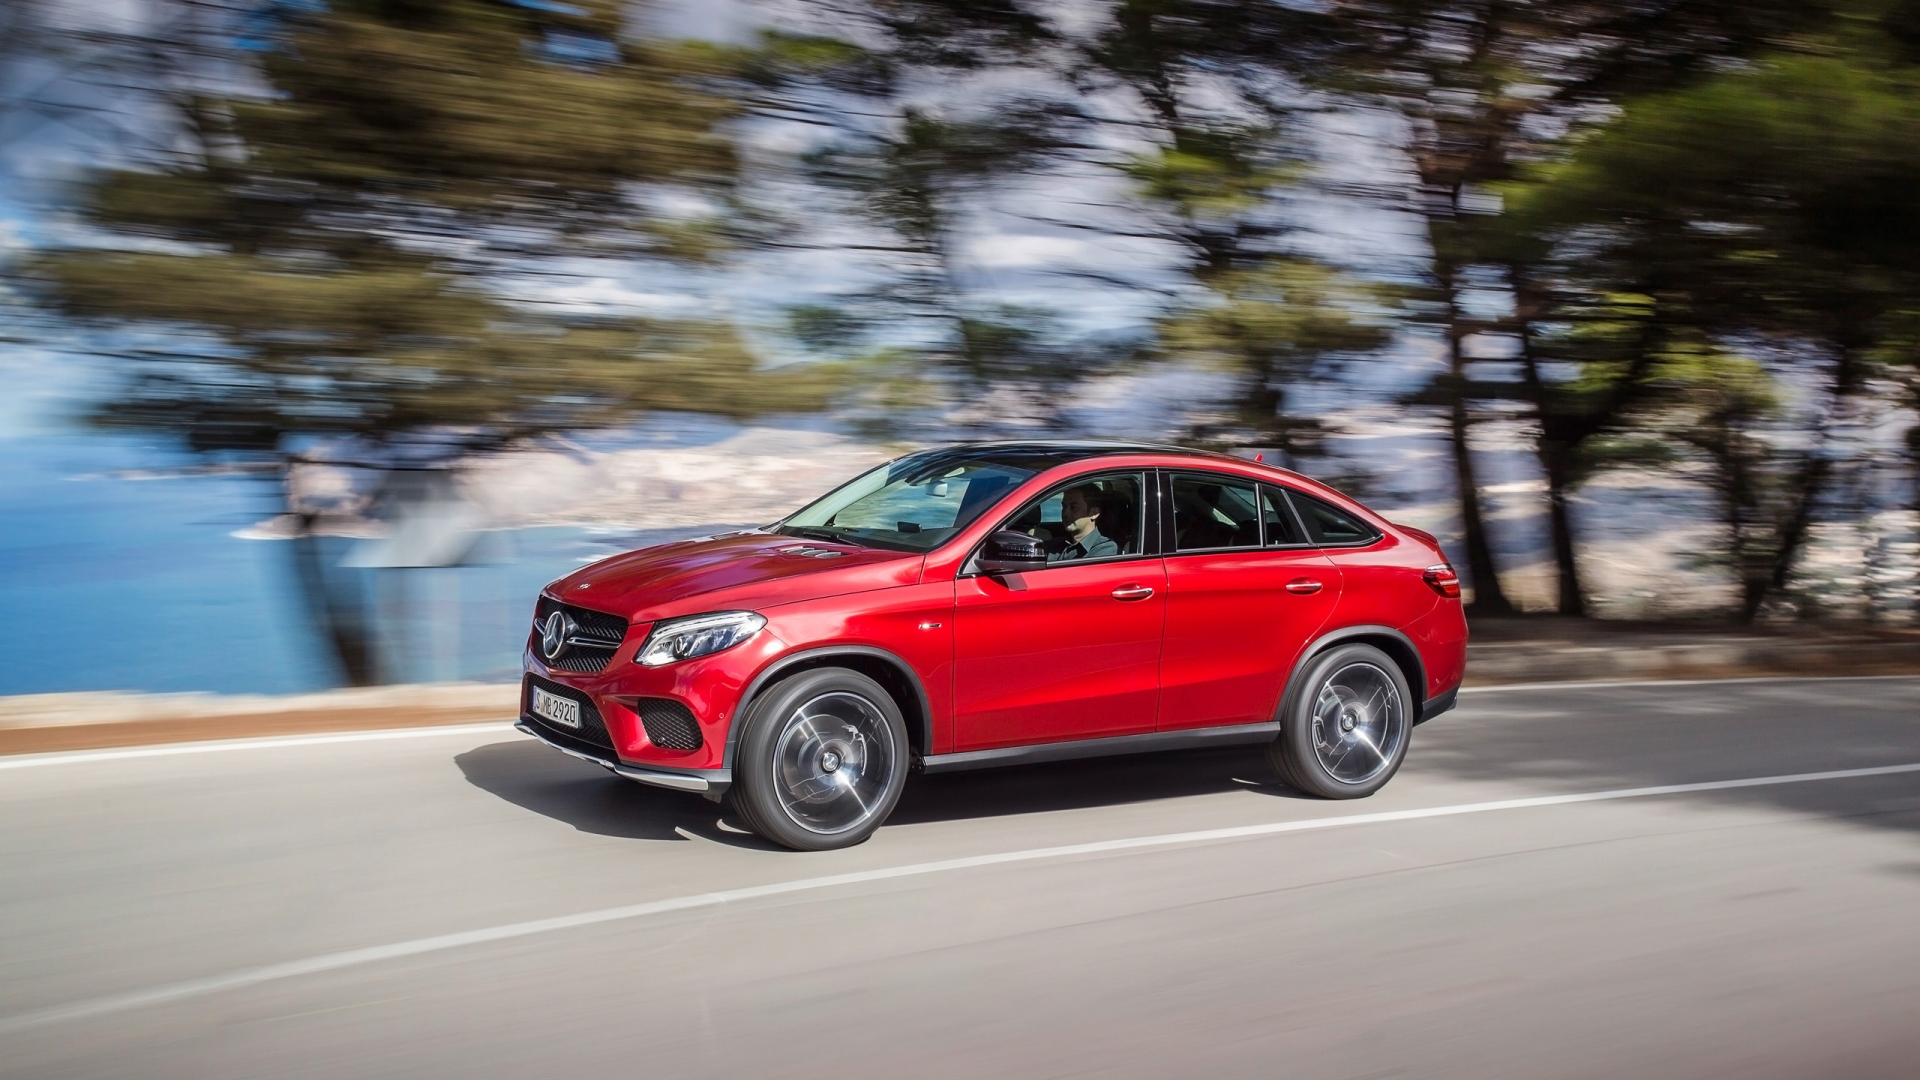 Mercedes Benz GLE Coupe for 1920 x 1080 HDTV 1080p resolution